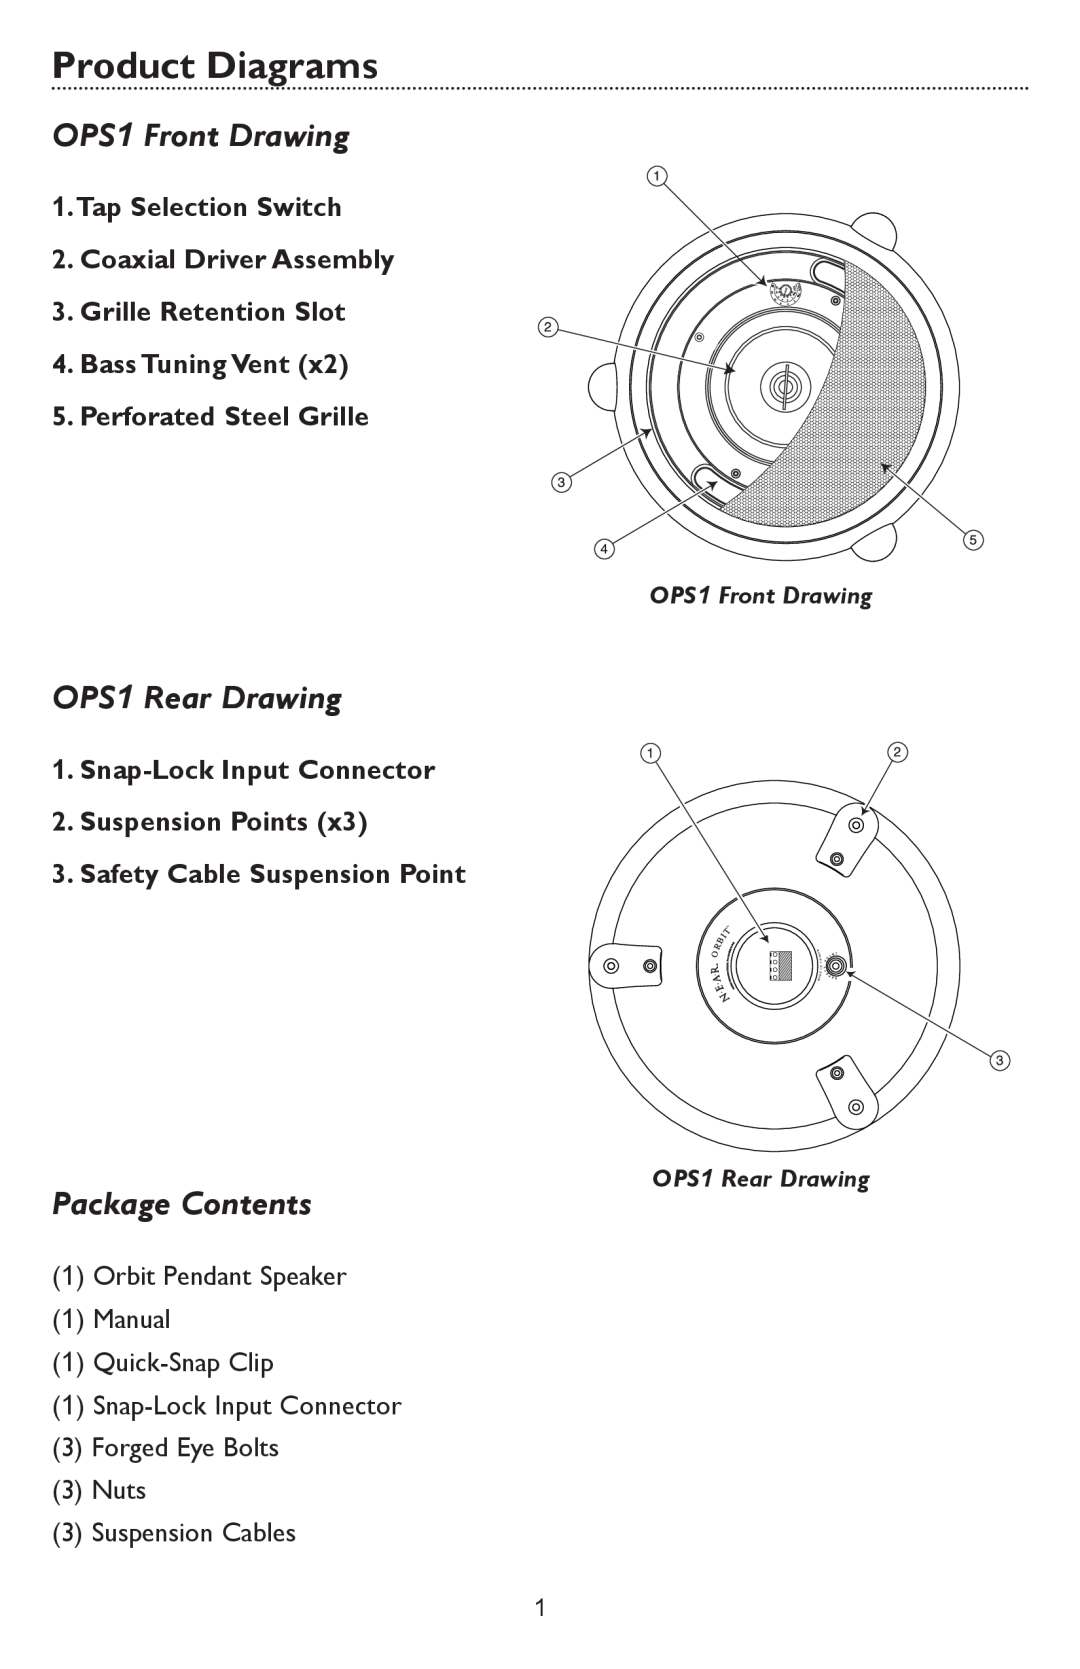 Bogen specifications Product Diagrams, OPS1 Front Drawing, OPS1 Rear Drawing, Package Contents 